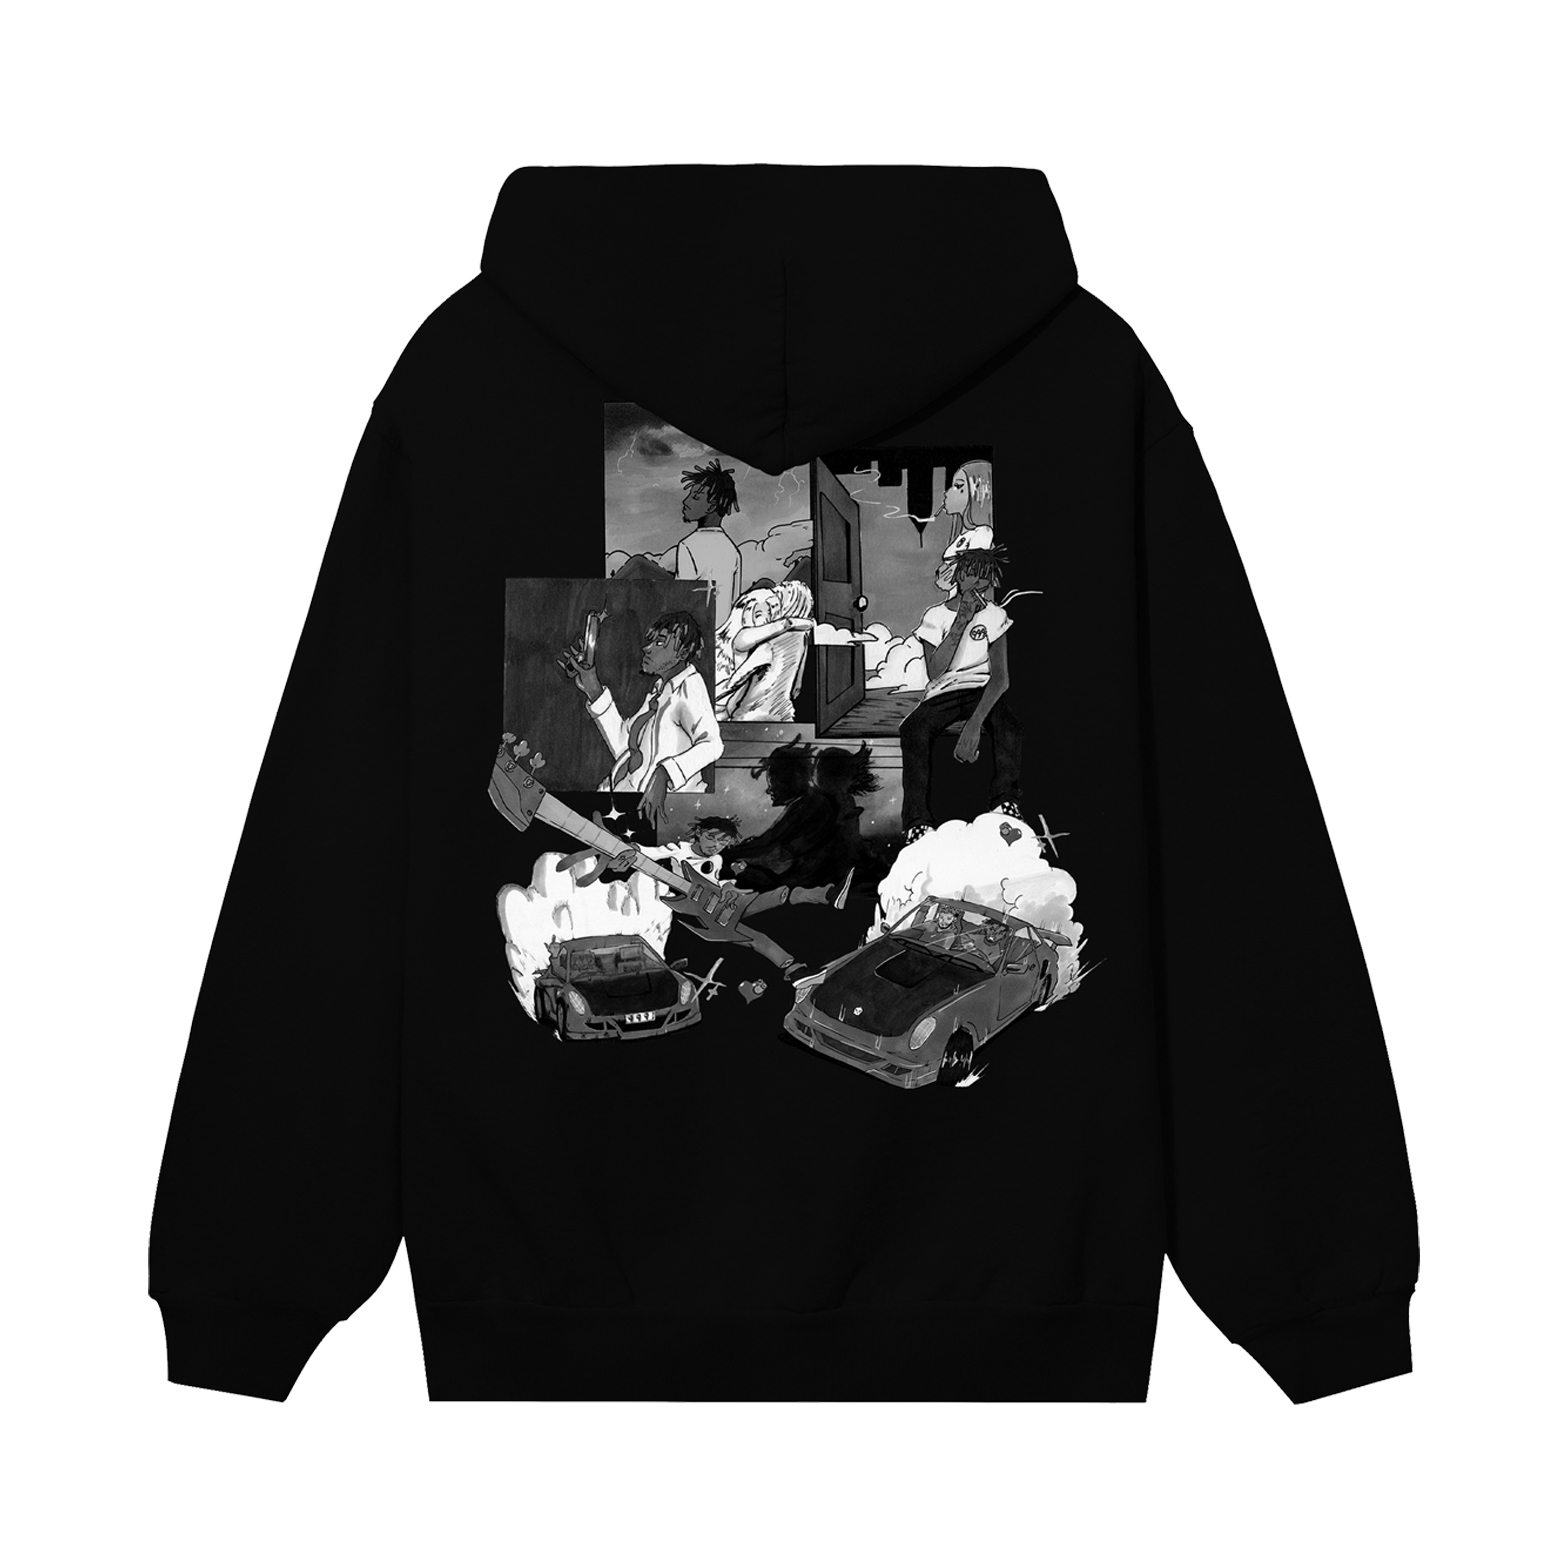 Revenge Hoodies The Ultimate Blend of Style and Comfort